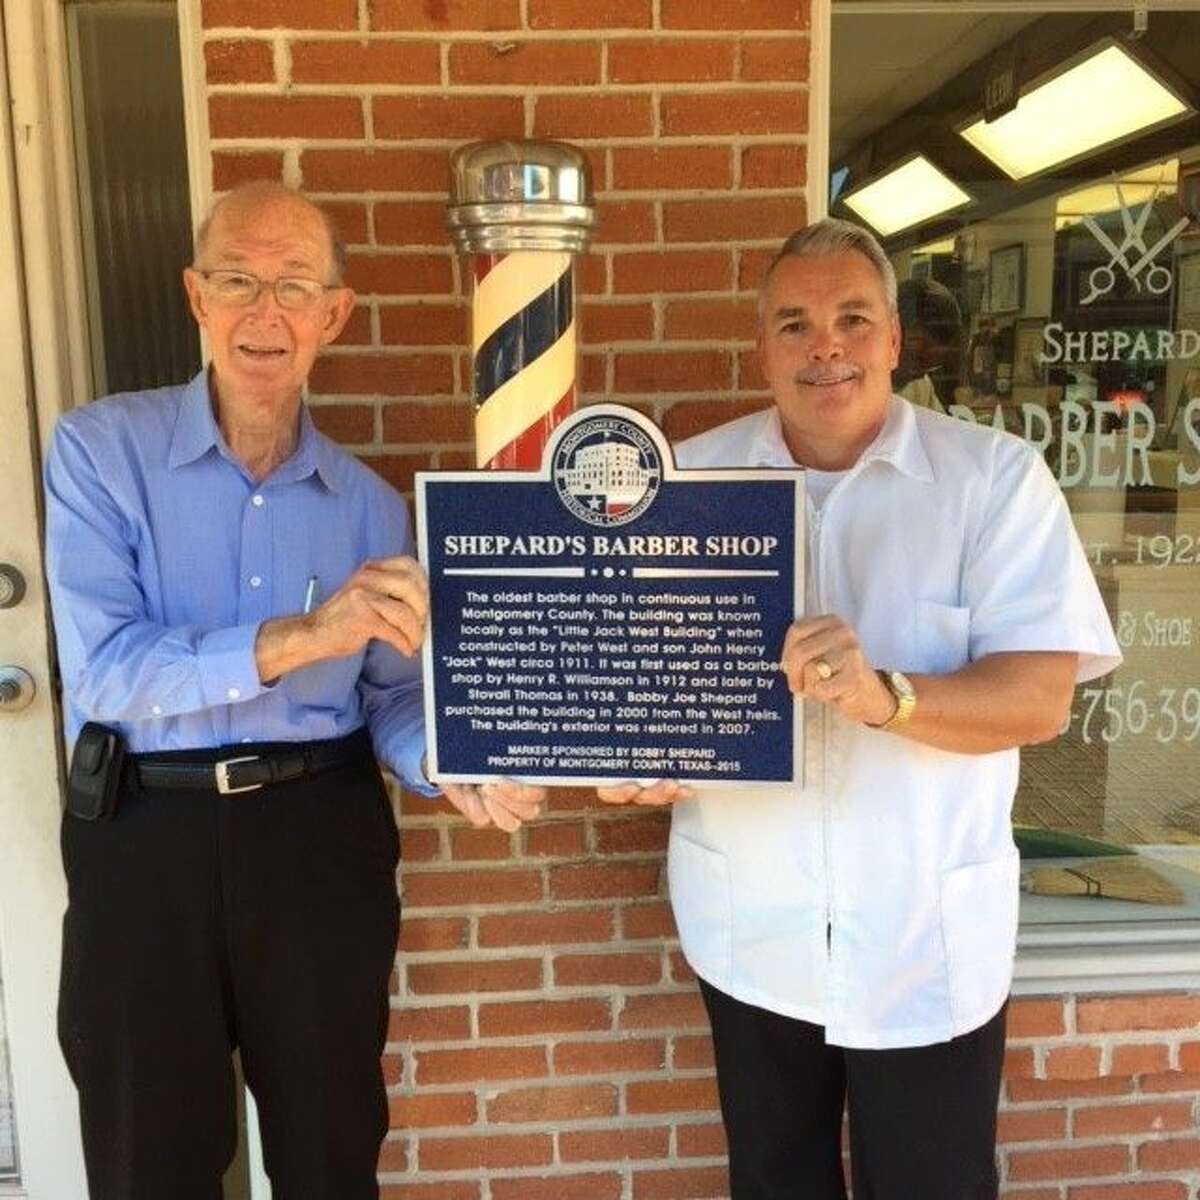 Pictured are Bob Shepard, left, and Leon Apostolo, right. The Montgomery County Commissioners Court and the County Historical Commission will be dedicating the county's first Montgomery County Historical Marker on Tuesday, Oct. 13, at 8:30 a.m. at Shepard’s Barber Shop at 116 Simonton Street in downtown Conroe (across from the Red Brick Tavern). This old building, built in 1911 and then known as the "Little Jack West Building,” has been continuously used as a barber shop since 1912. Apostolo currently owns Shepard’s Barber Shop and Shepard owns the historic building the shop is in.